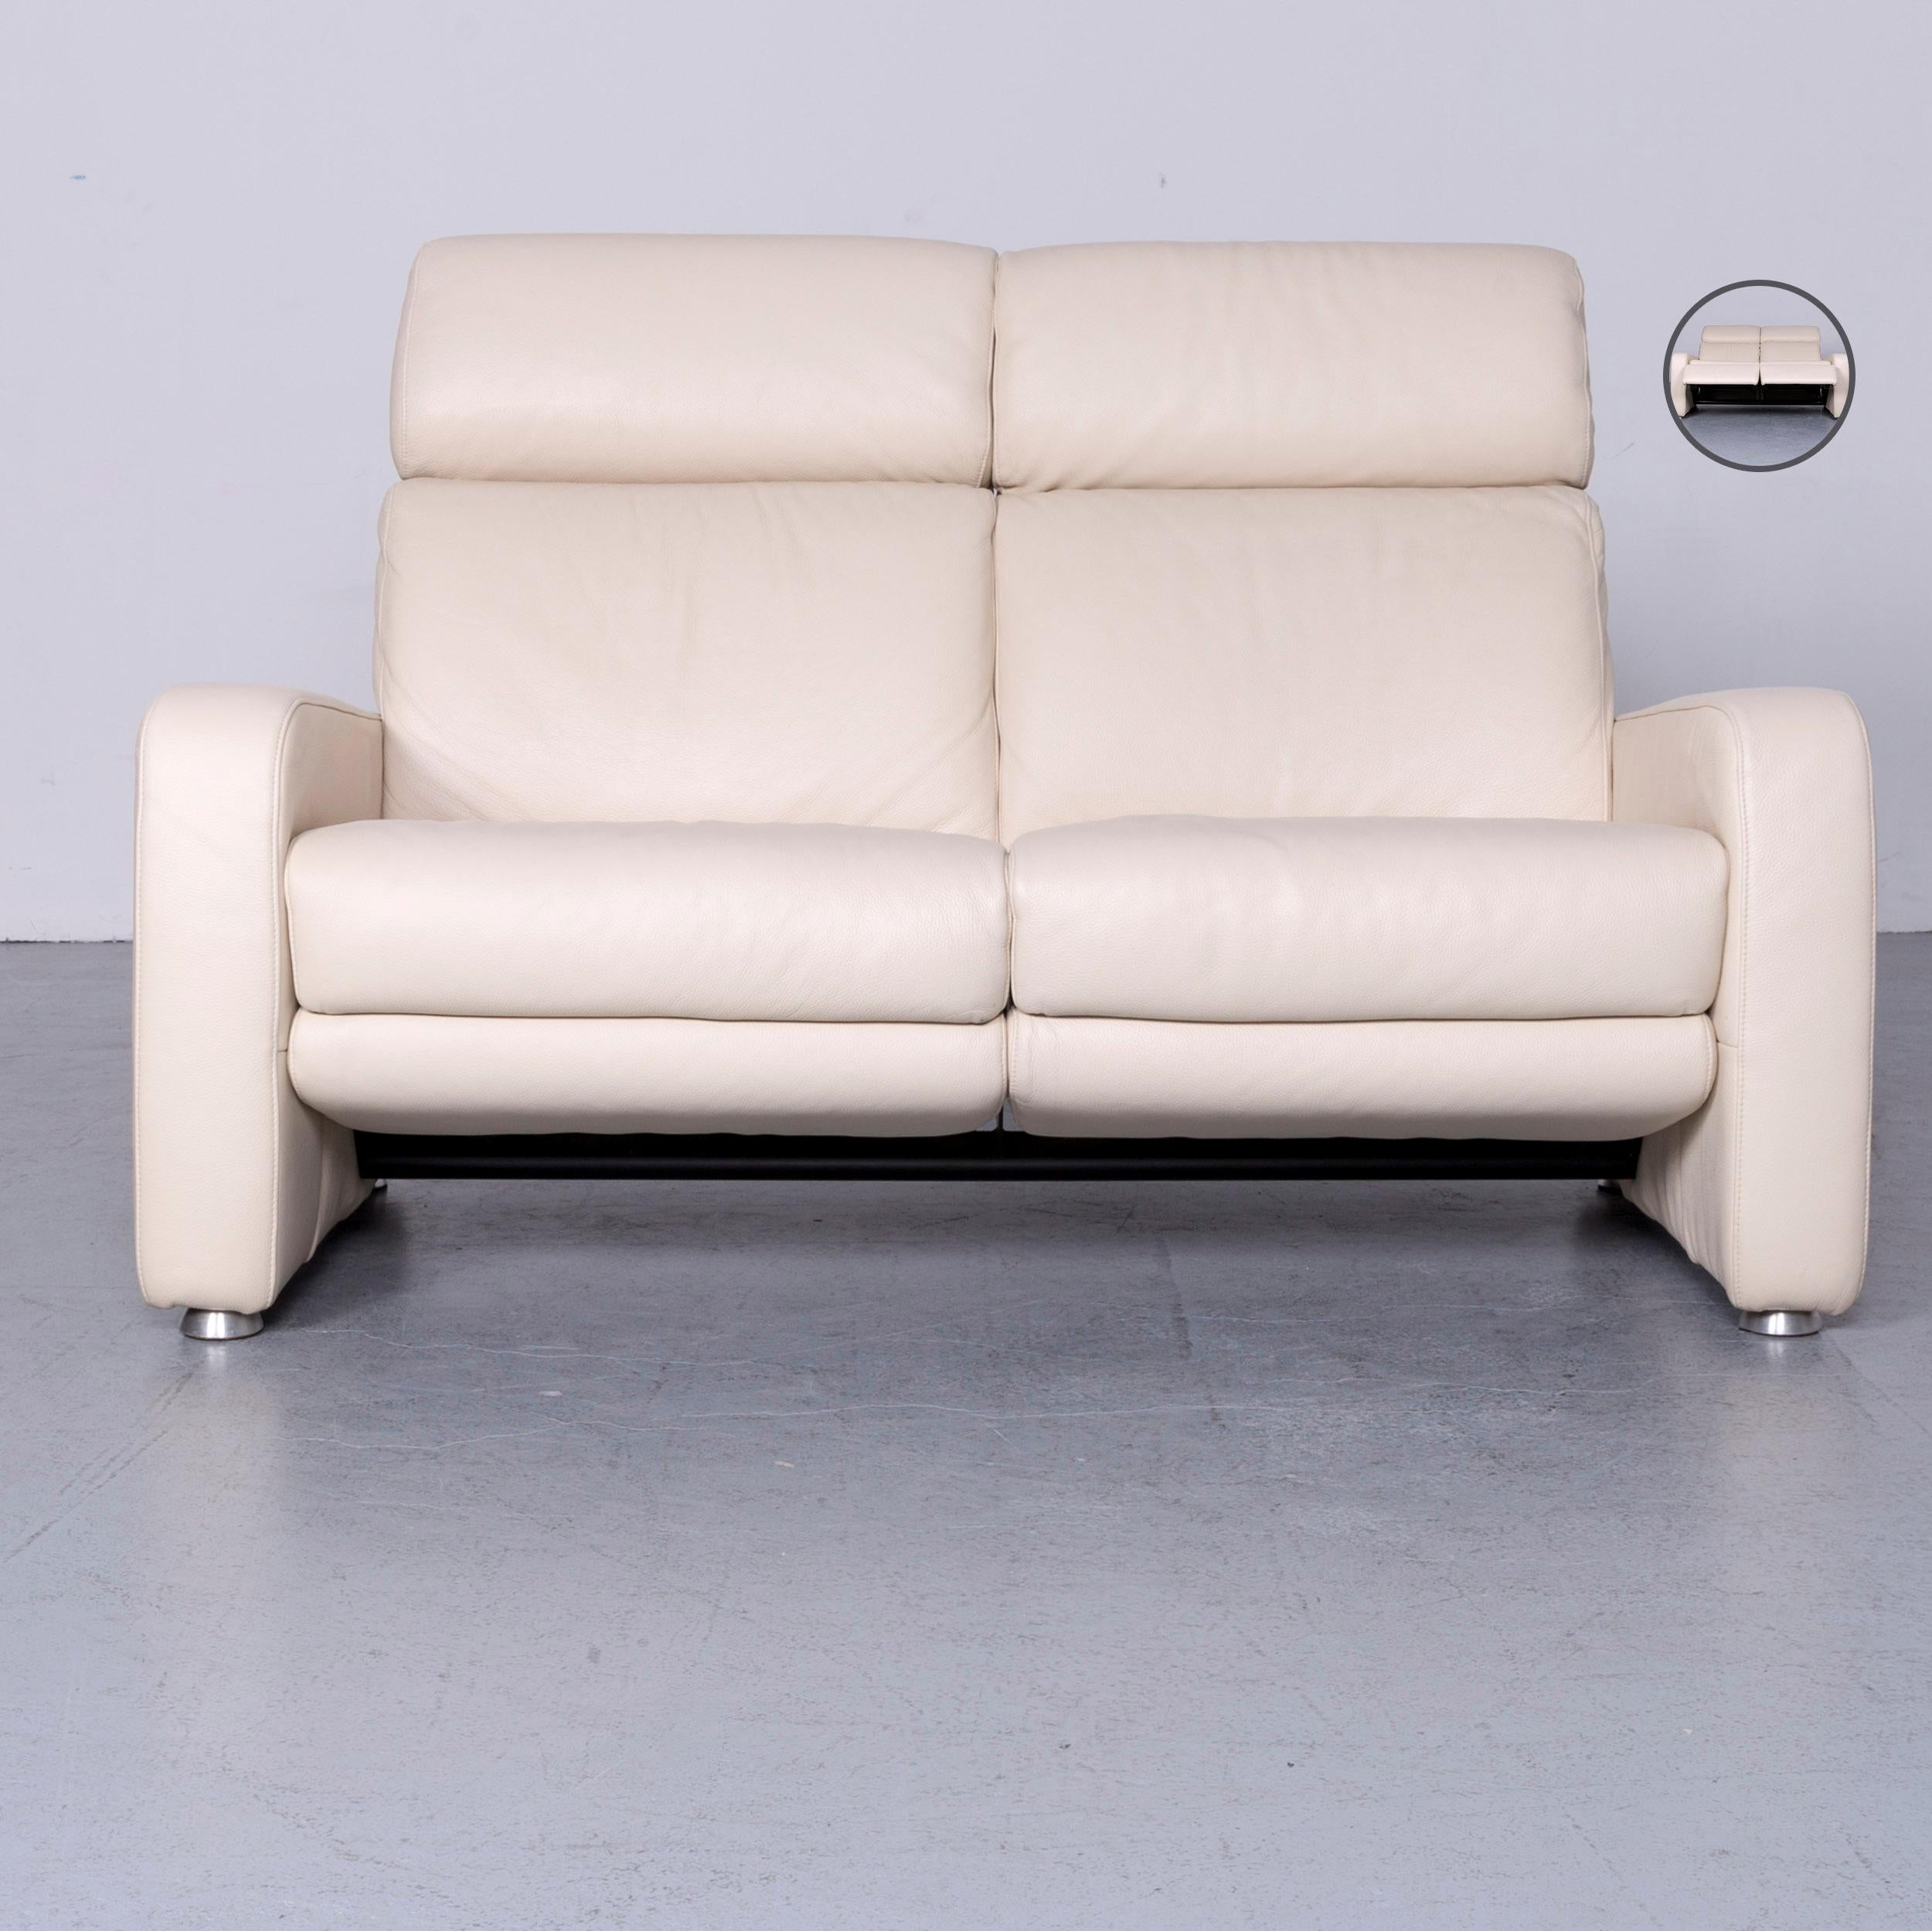 We bring to you an Willi Schillig designer leather sofa beige two-seat couch recliner.































 